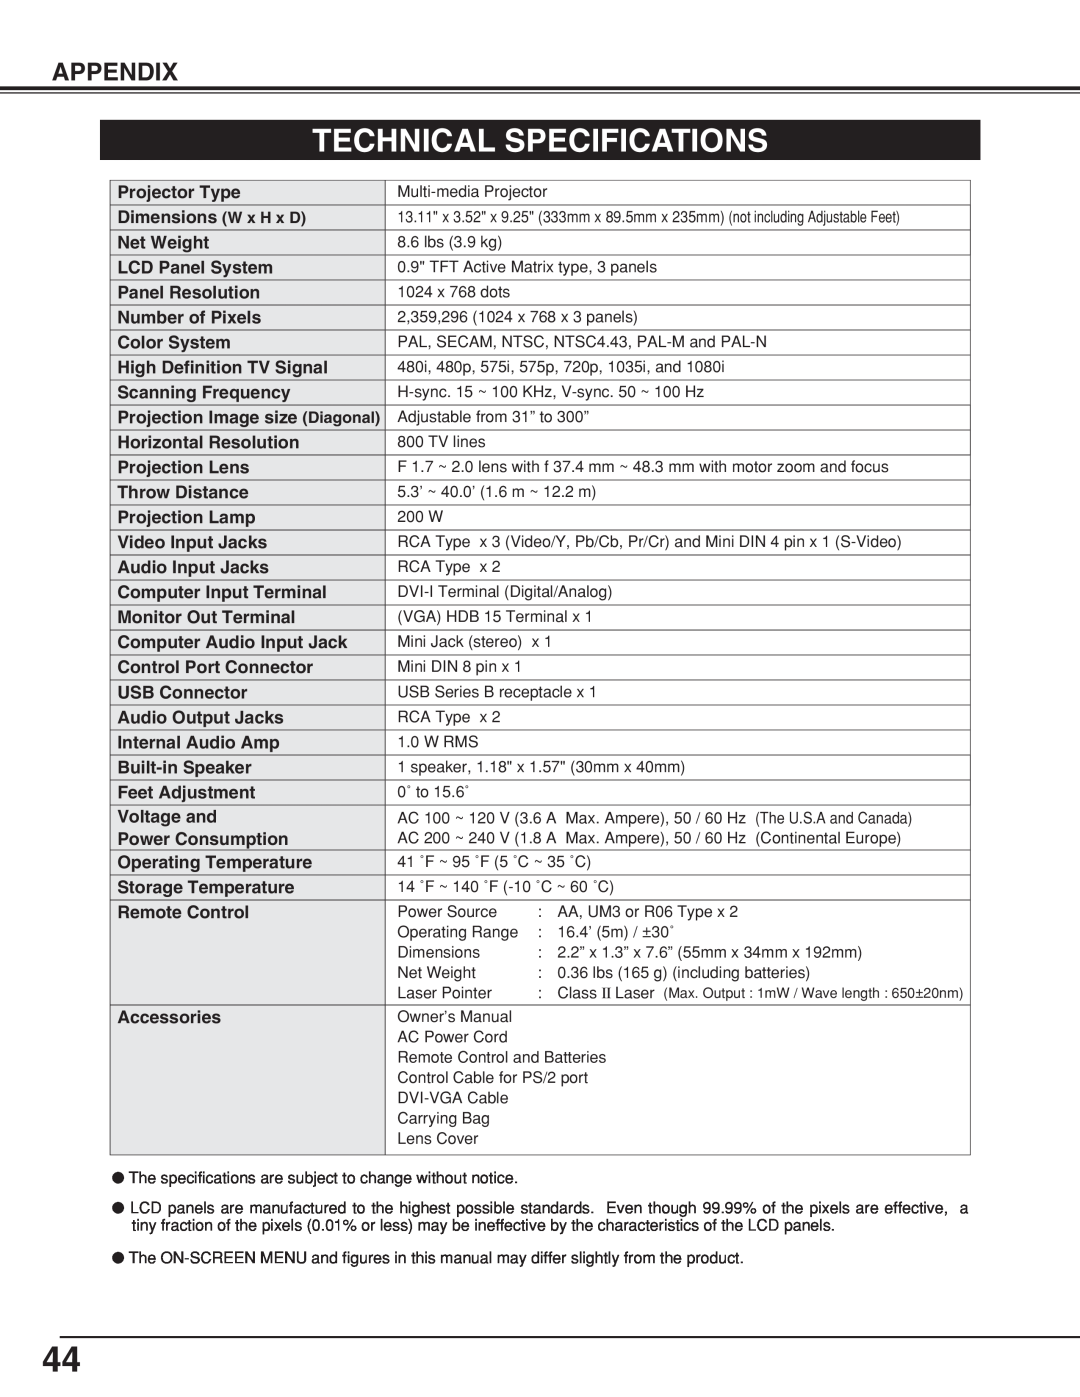 Eiki LC-XNB5M owner manual Technical Specifications, Appendix 